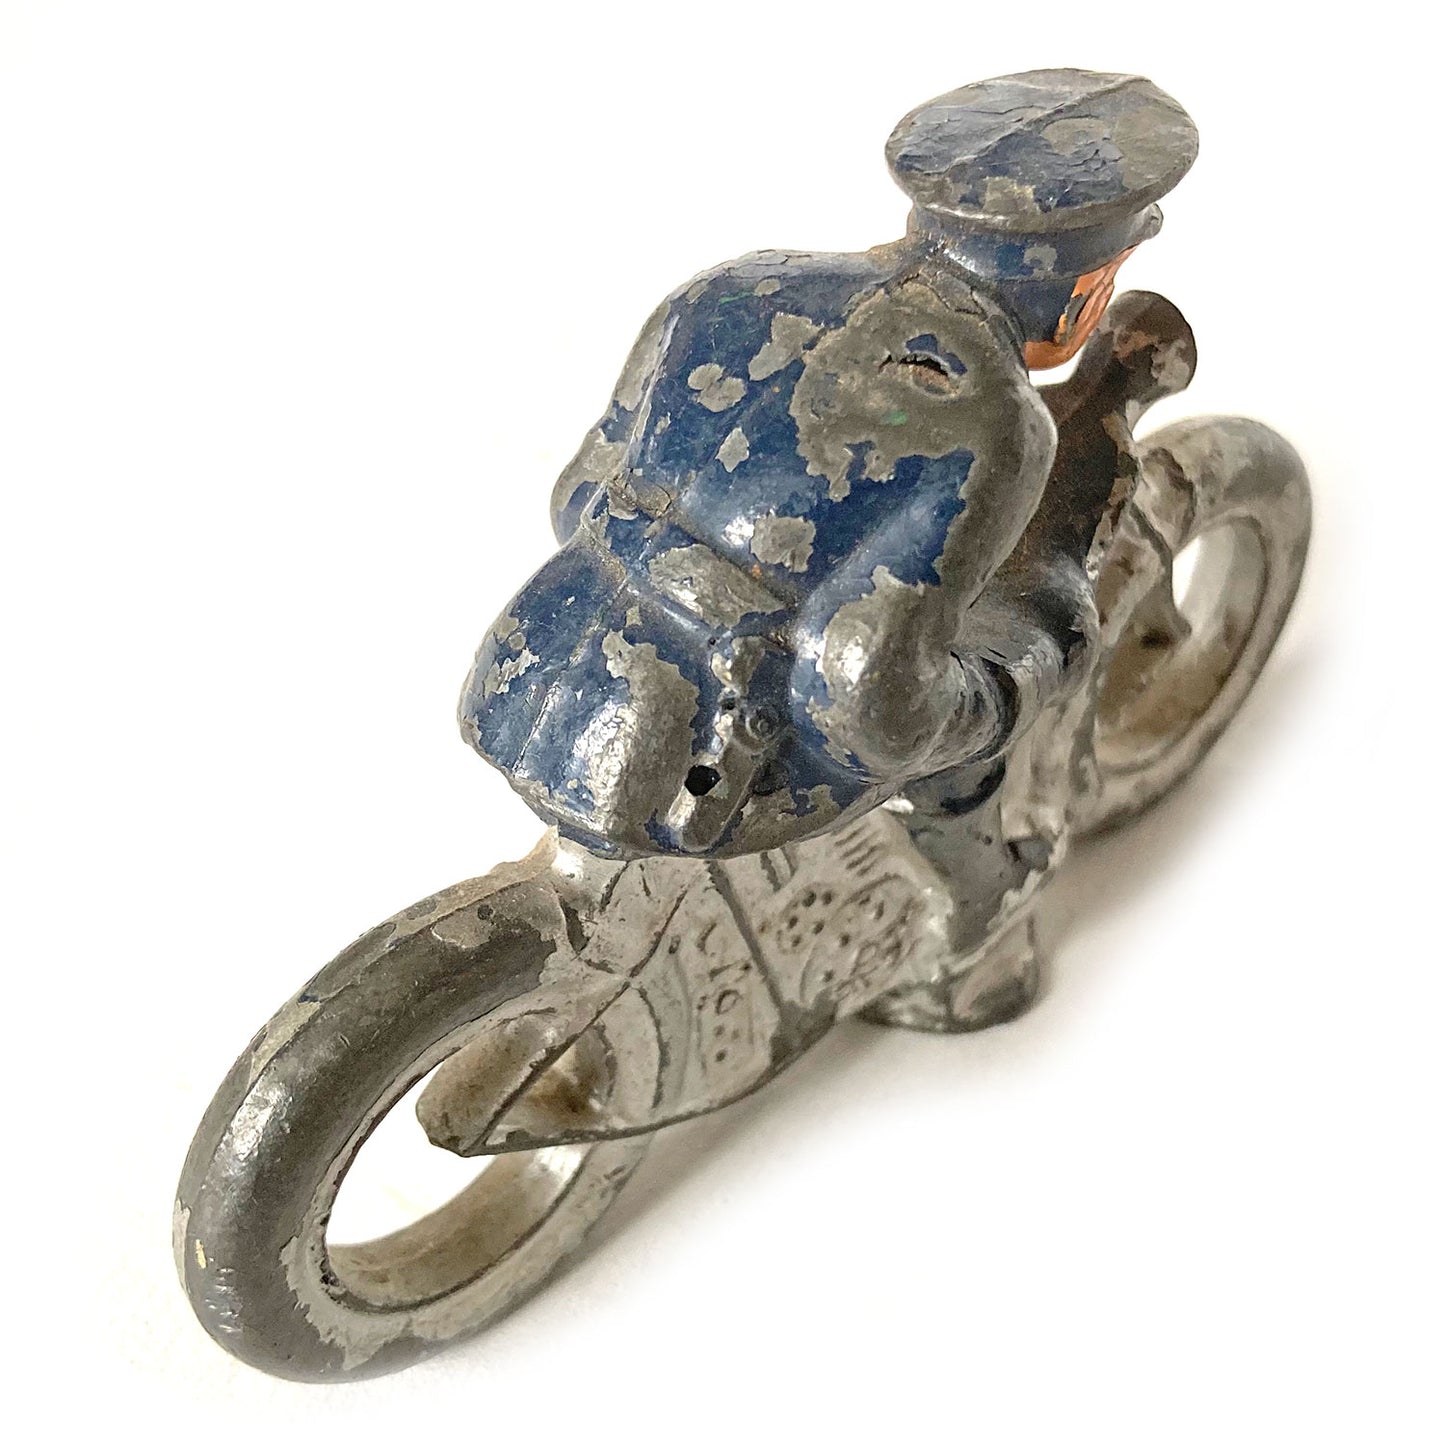 Hollow-cast Barclay lead motorcycle cop toy, Indian or Harley, 1930s-40s